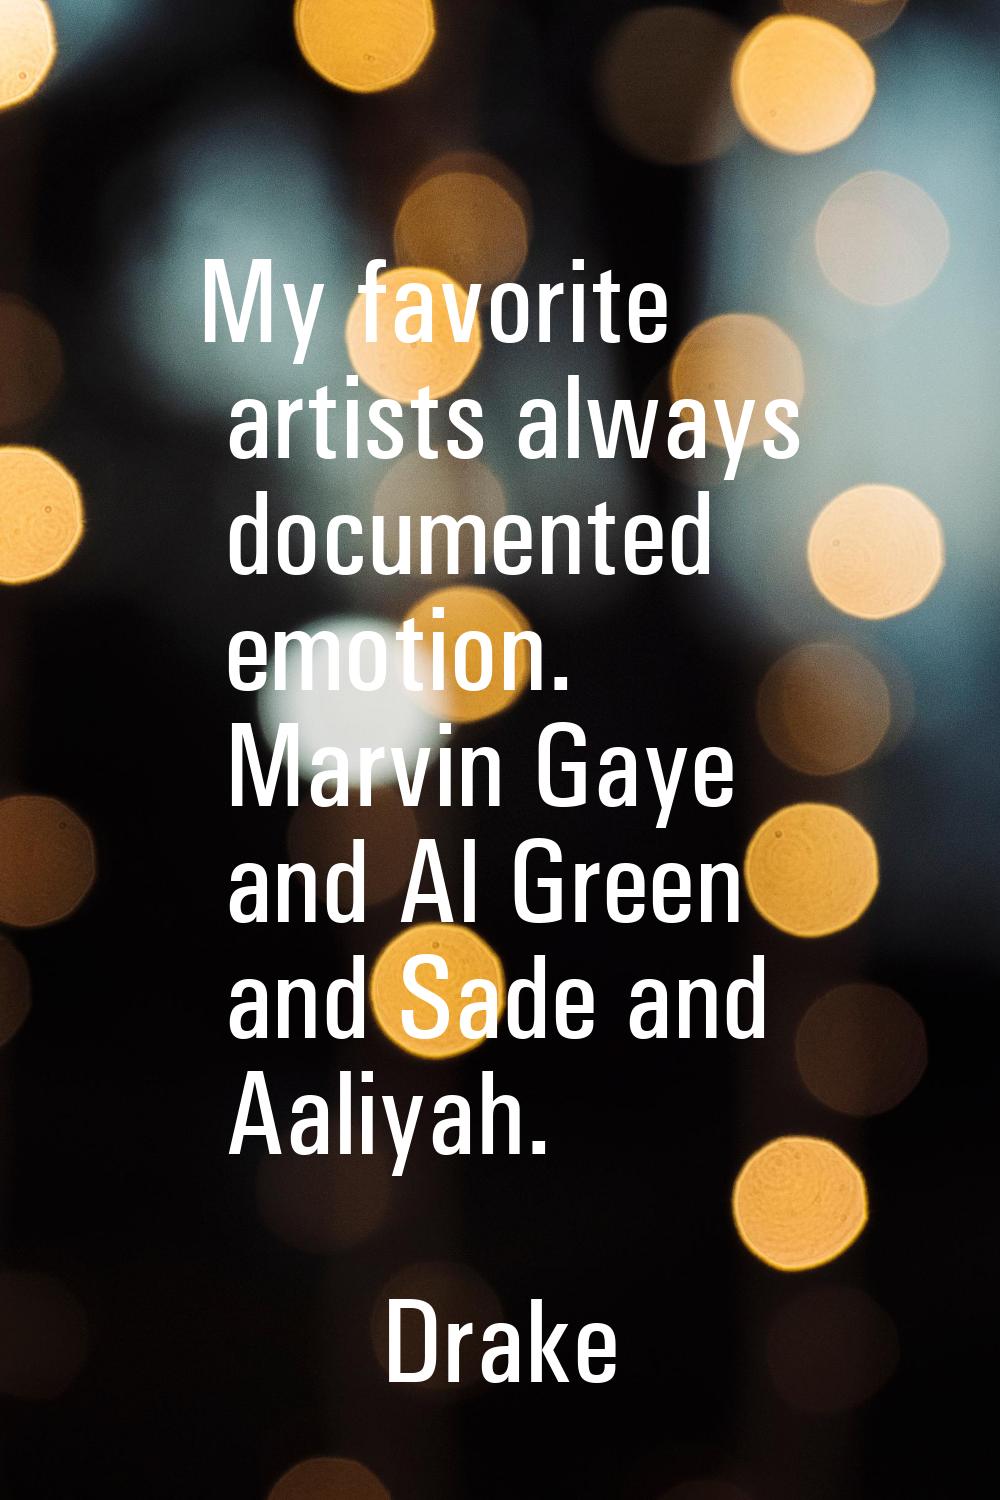 My favorite artists always documented emotion. Marvin Gaye and Al Green and Sade and Aaliyah.